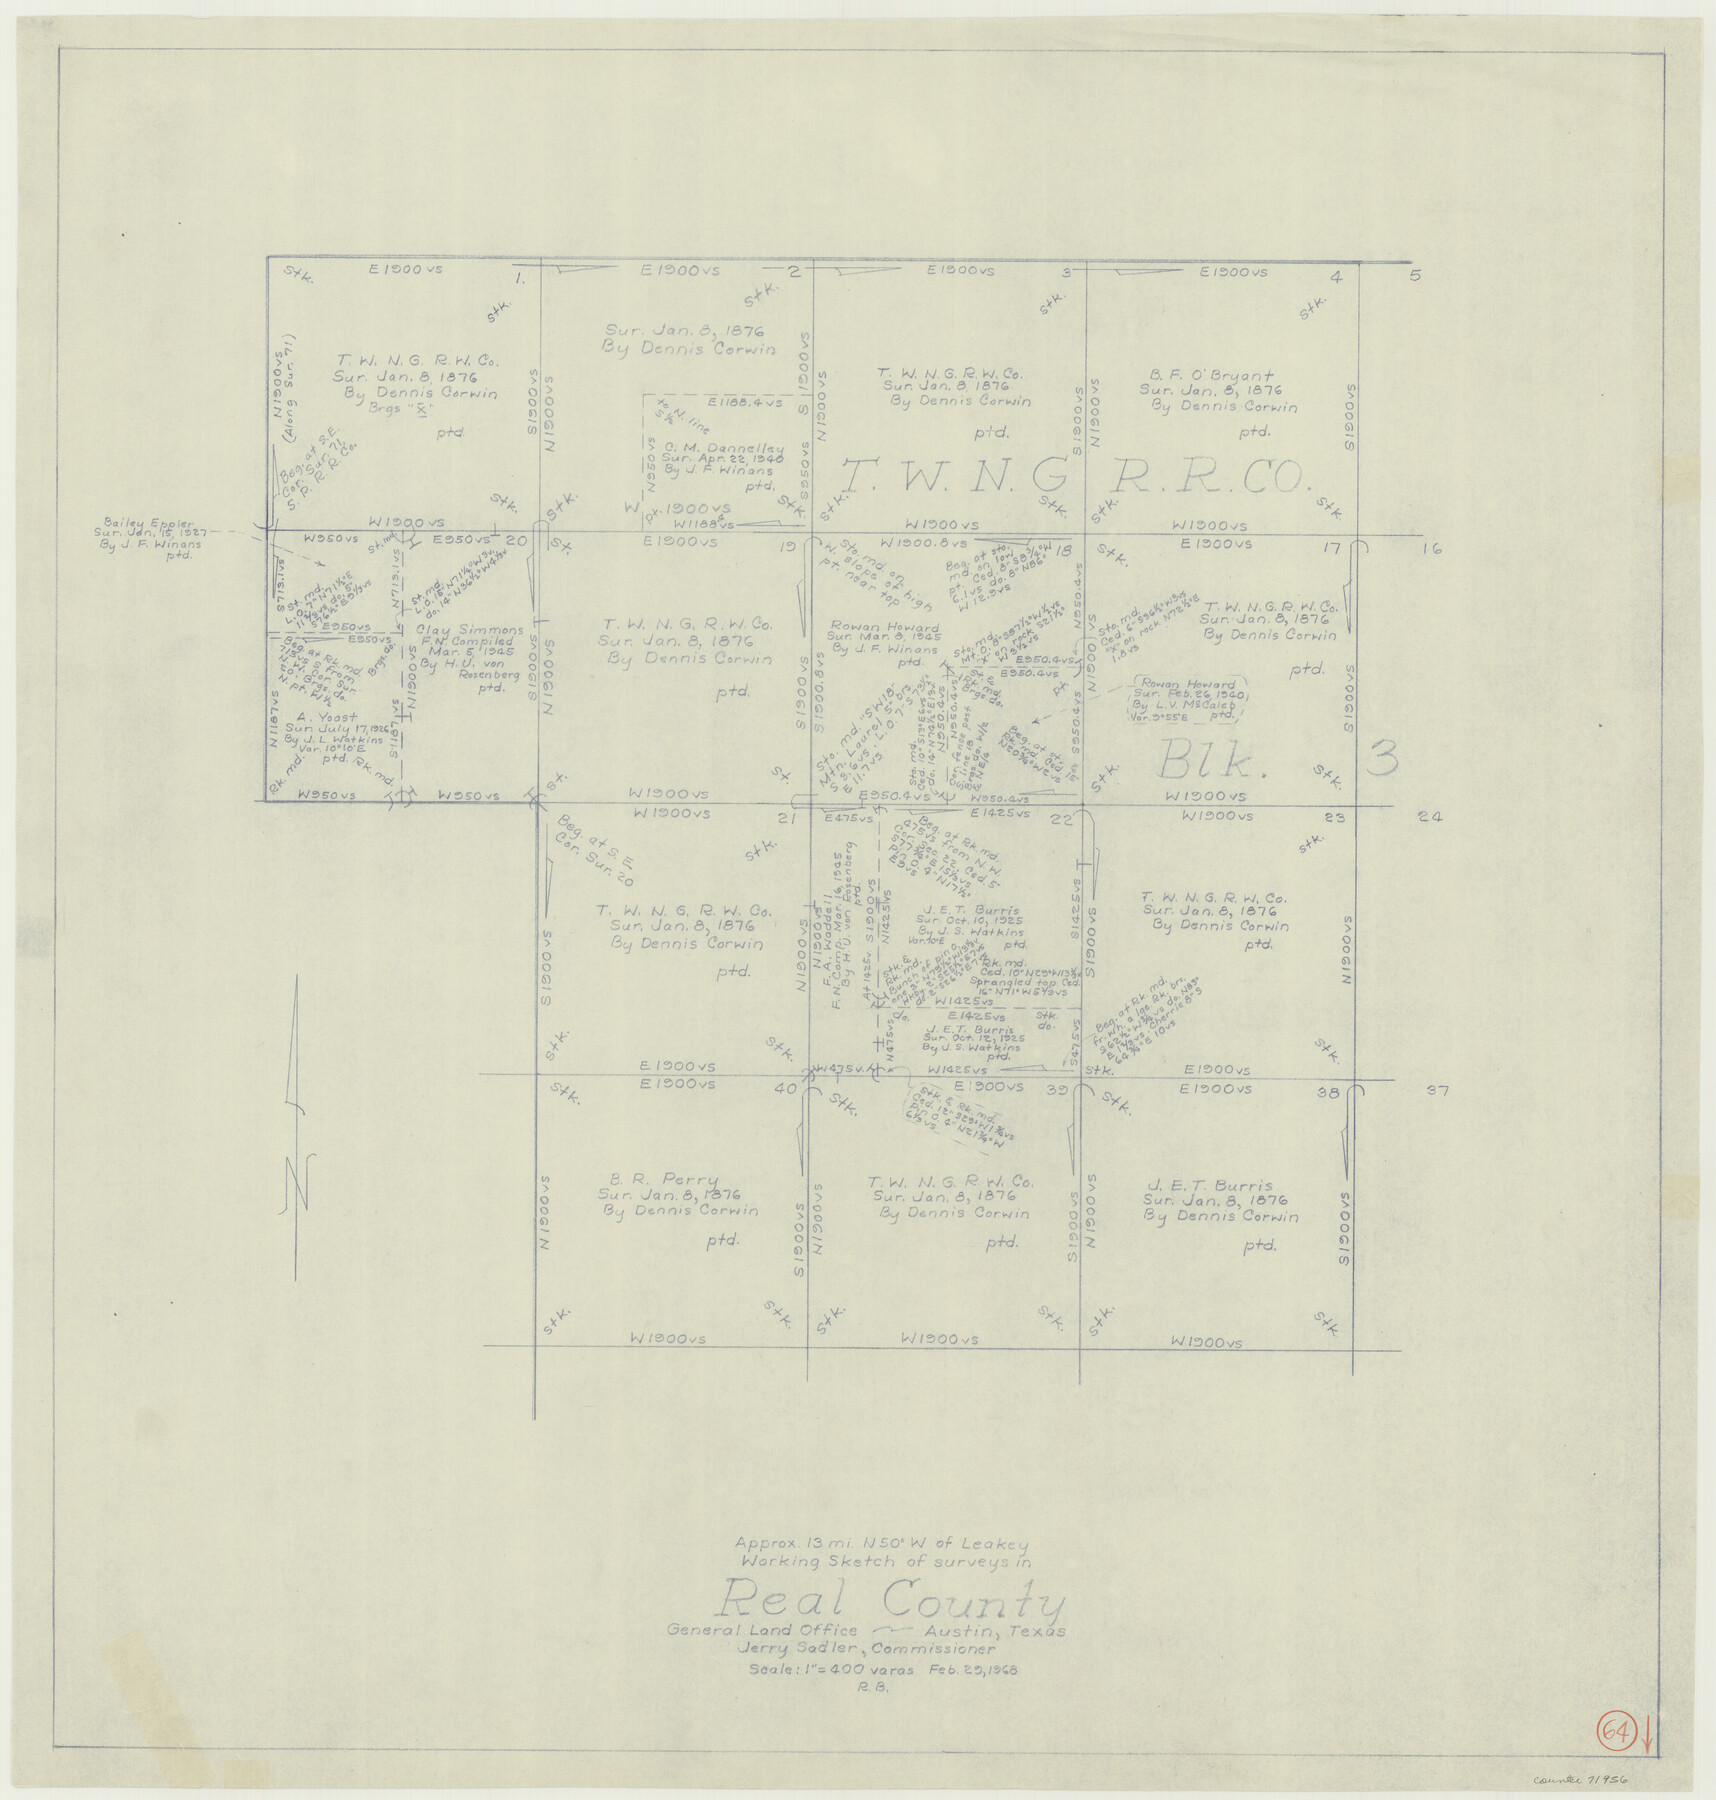 71956, Real County Working Sketch 64, General Map Collection